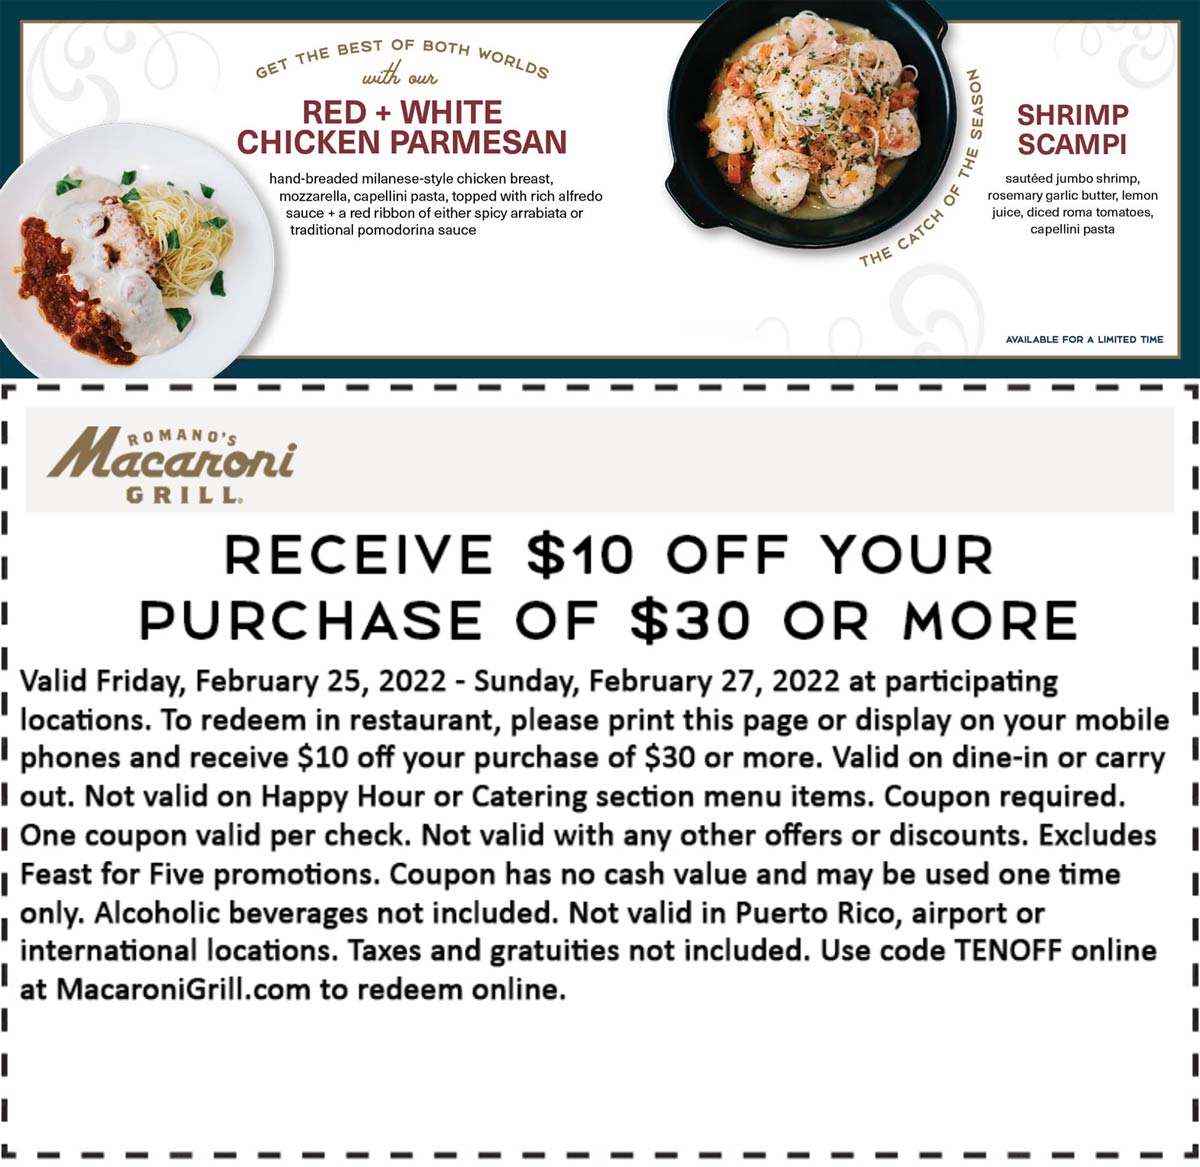 Macaroni Grill restaurants Coupon  $10 off $30 at Macaroni Grill restaurants #macaronigrill 